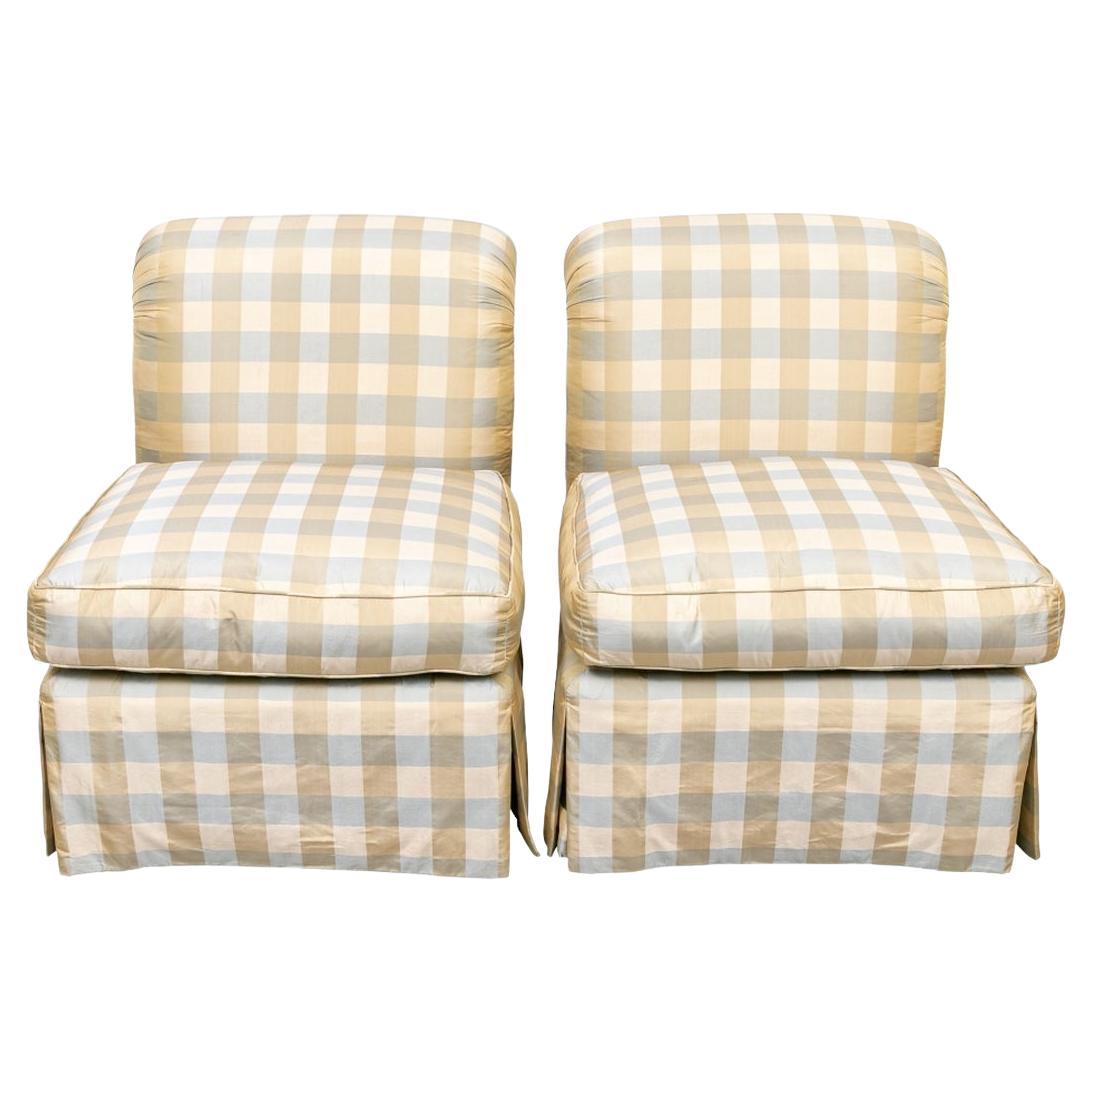 Pair of Elegant Slipper Chairs by the Cameron Collection, Dallas